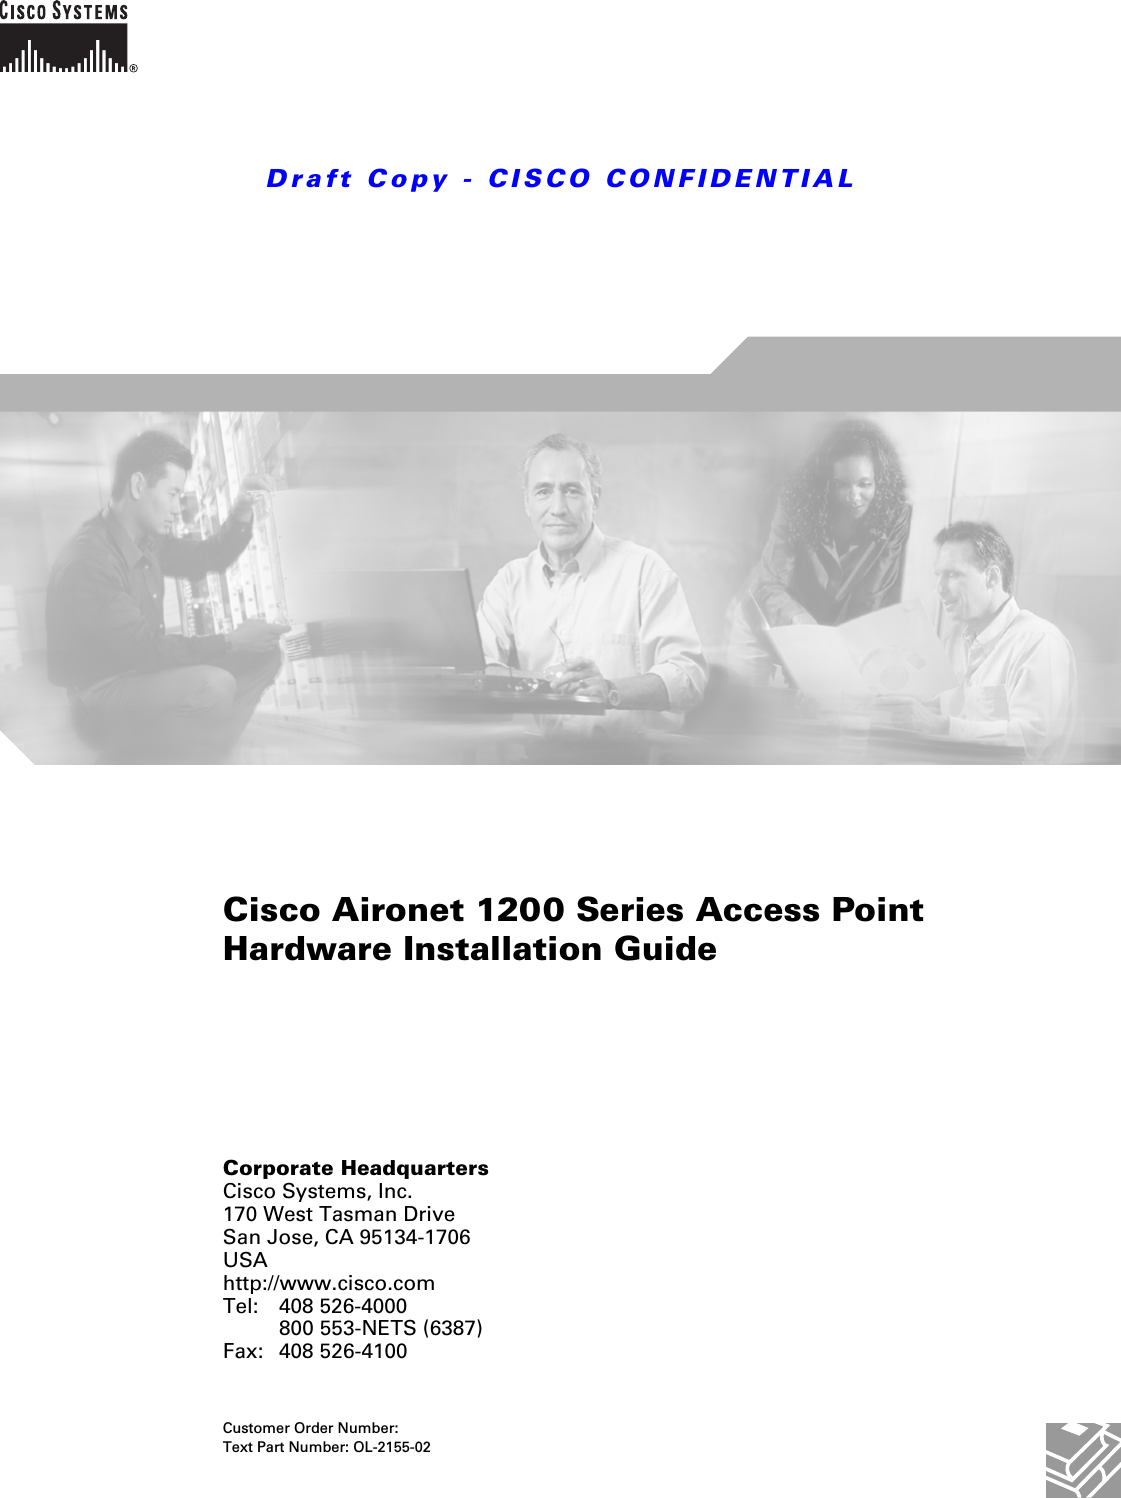 Draft Copy - CISCO CONFIDENTIAL Corporate HeadquartersCisco Systems, Inc.170 West Tasman DriveSan Jose, CA 95134-1706 USAhttp://www.cisco.comTel: 408 526-4000800 553-NETS (6387)Fax: 408 526-4100Cisco Aironet 1200 Series Access Point Hardware Installation Guide Customer Order Number: Text Part Number: OL-2155-02